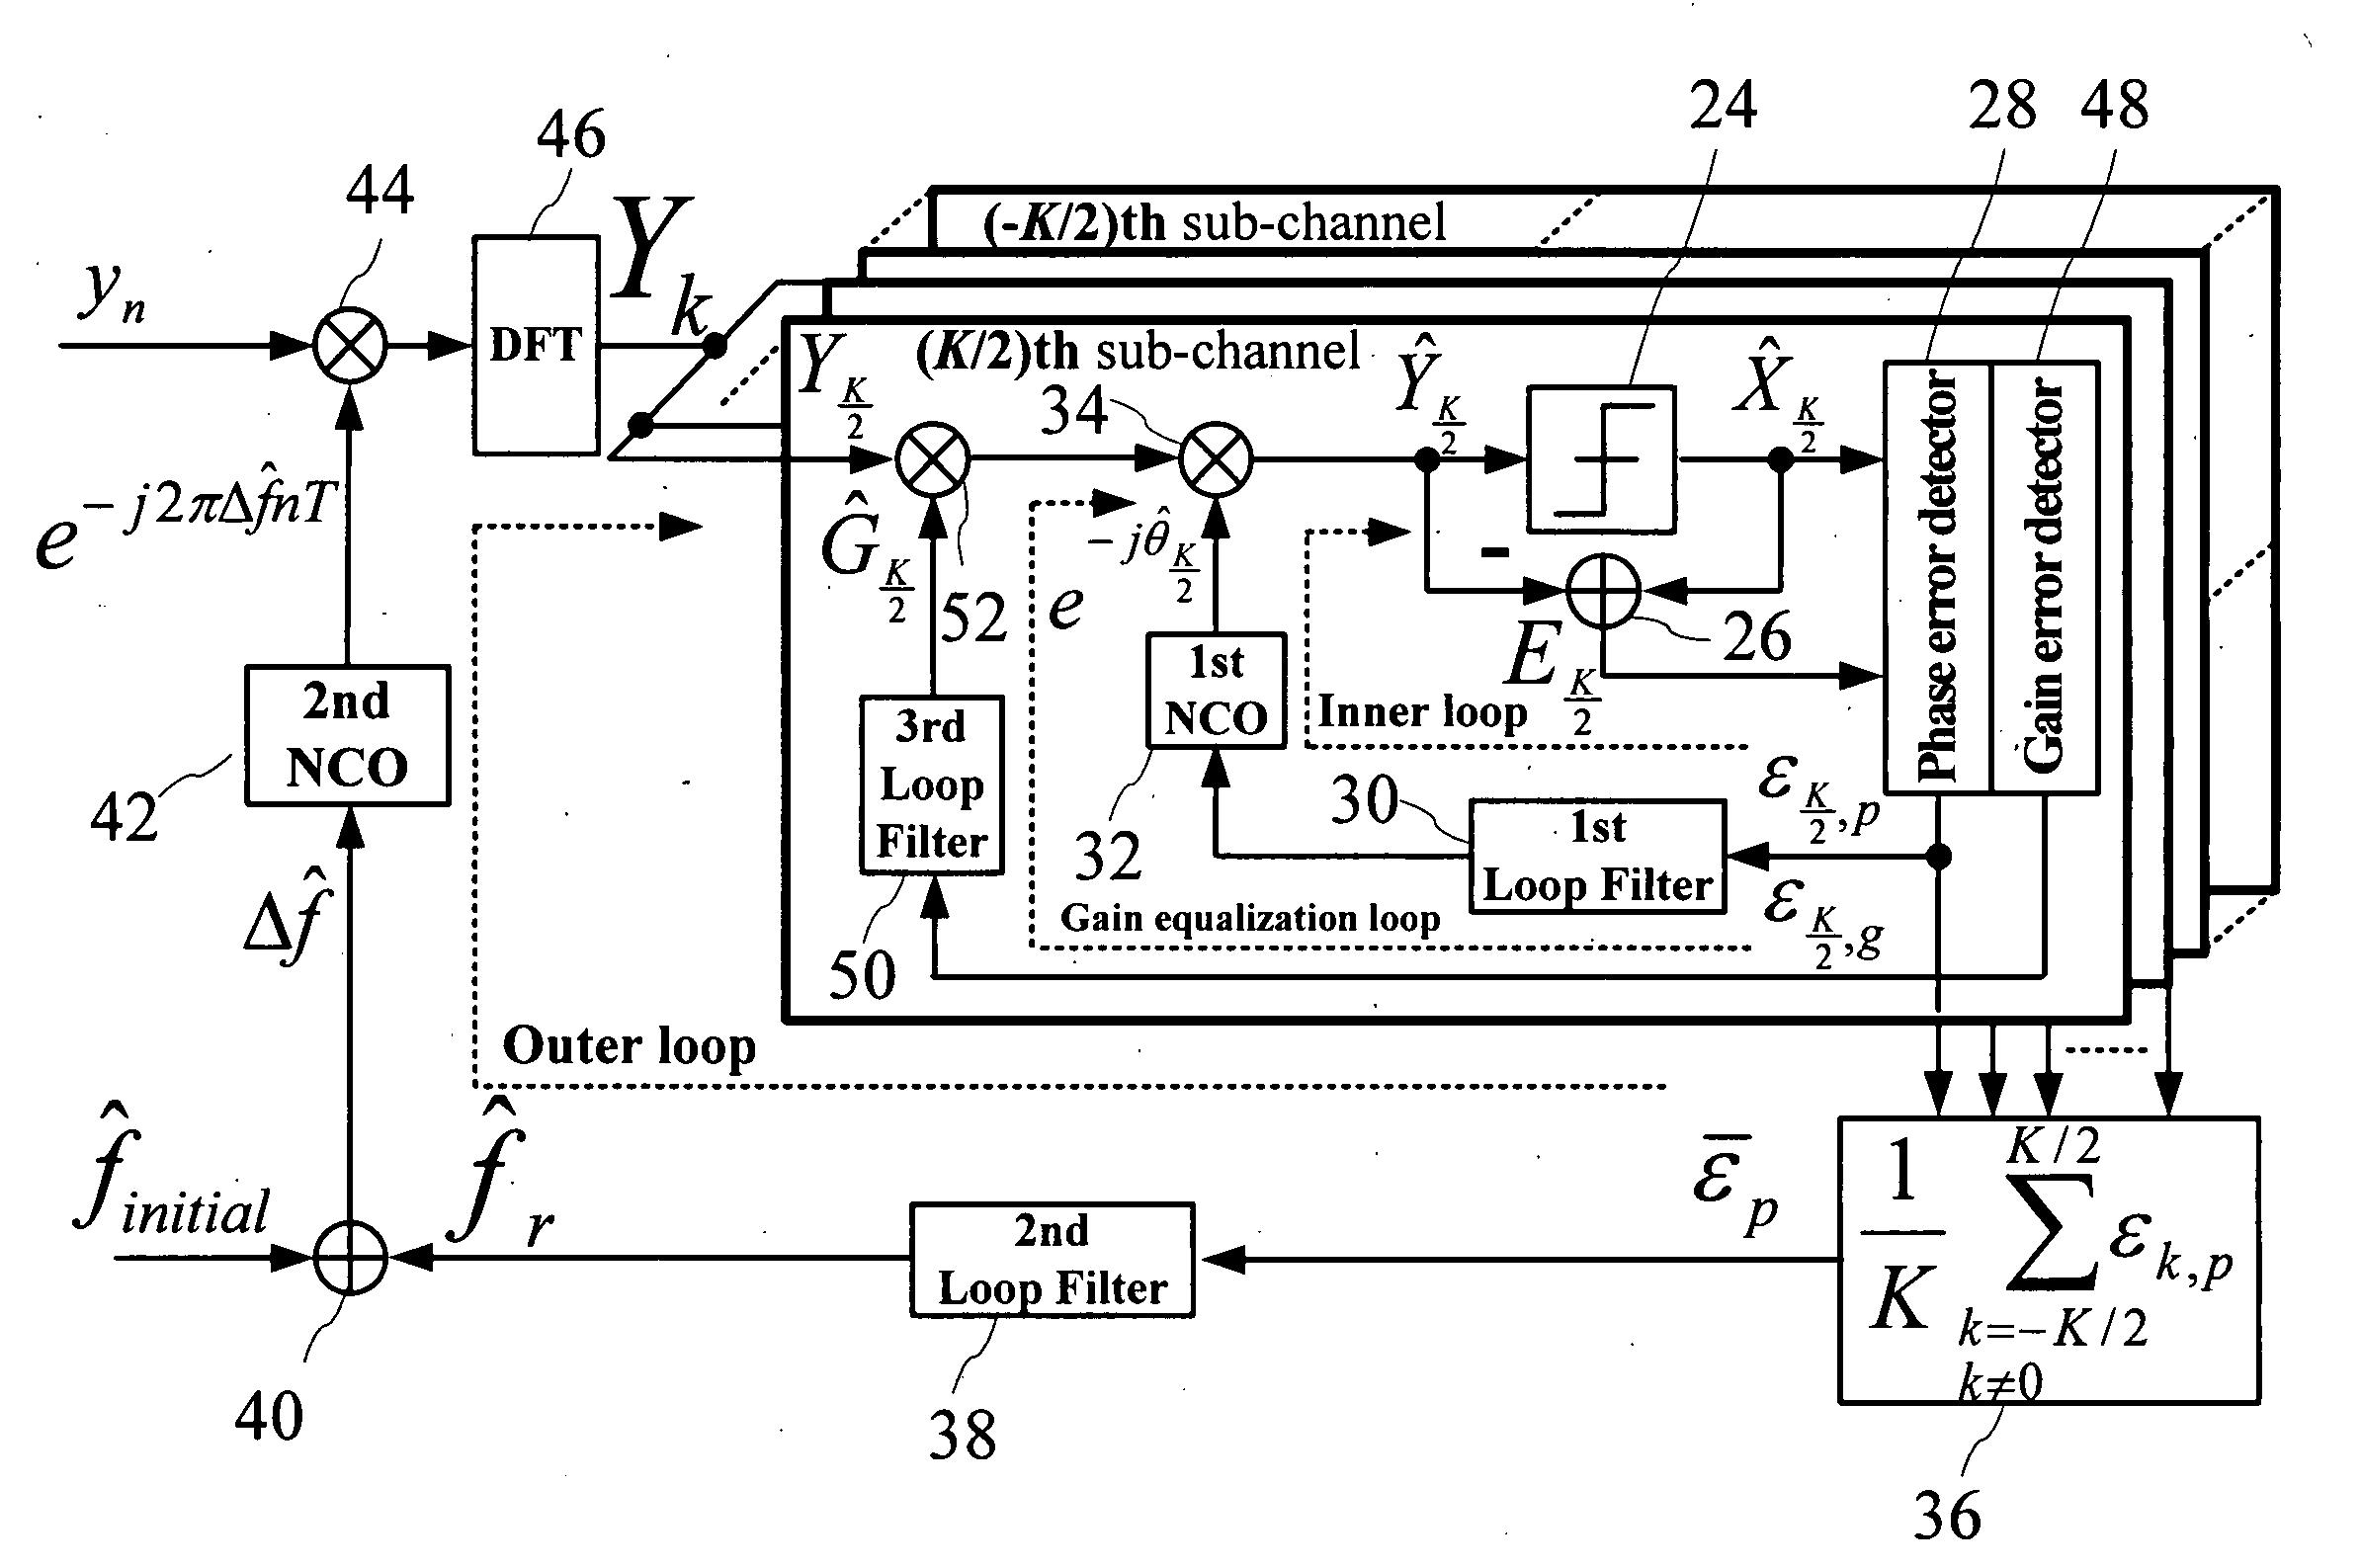 Joint carrier synchronization and channel equalization method for OFDM systems